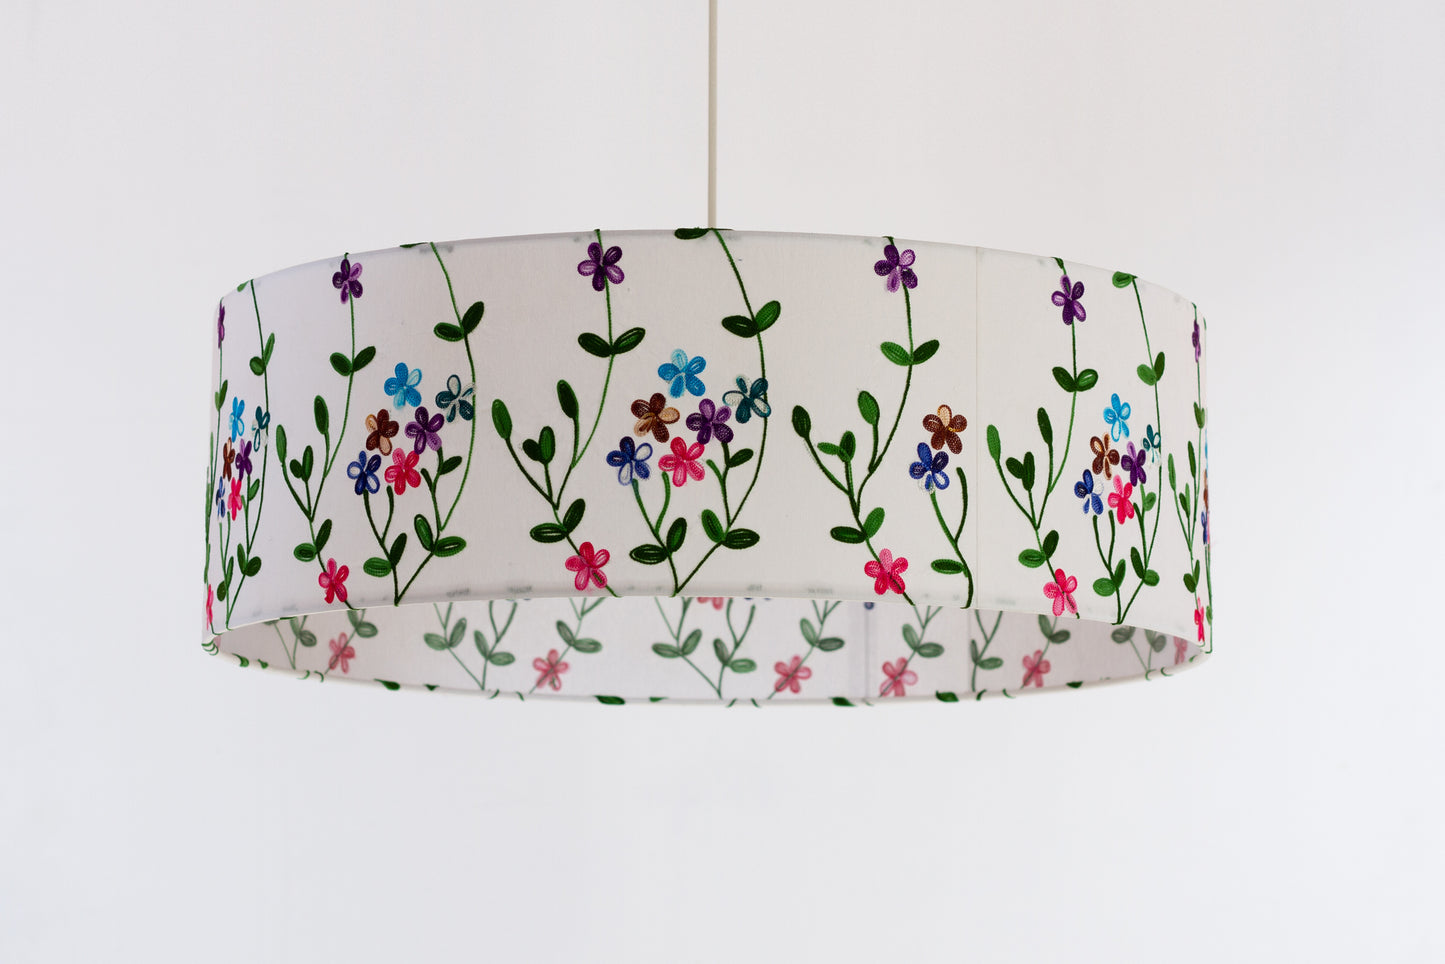 Drum Lamp Shade - P43 - Embroidered Flowers on White, 60cm(d) x 20cm(h)